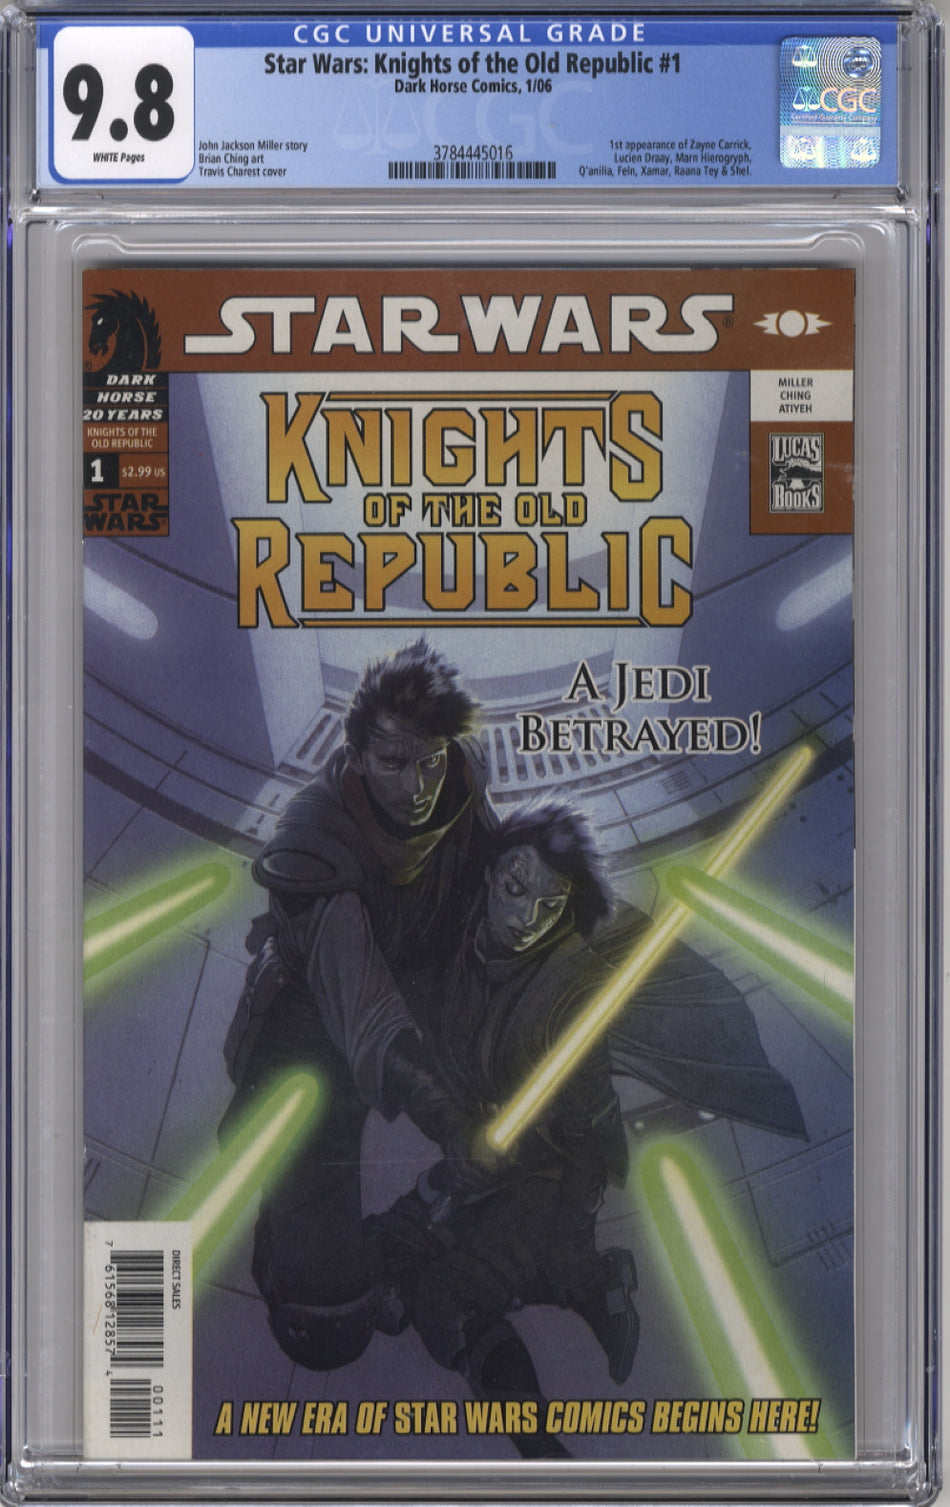 STAR WARS: KNIGHTS OF THE OLD REPUBLIC 001 - CGC 9.8